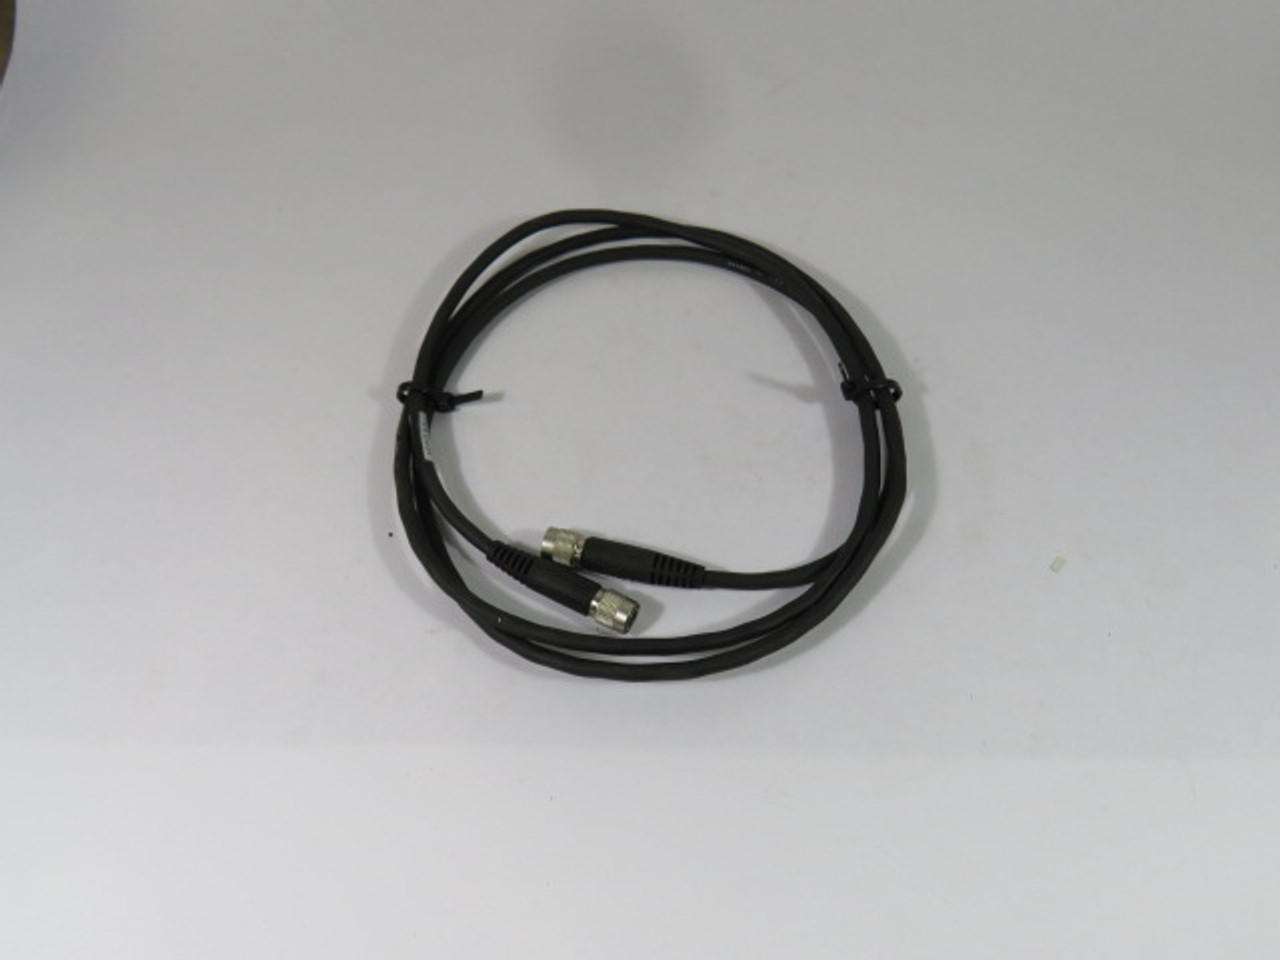 Nortech VCP-2.0-S Industrial 12-Pin Camera Cable Wire Male/Female USED